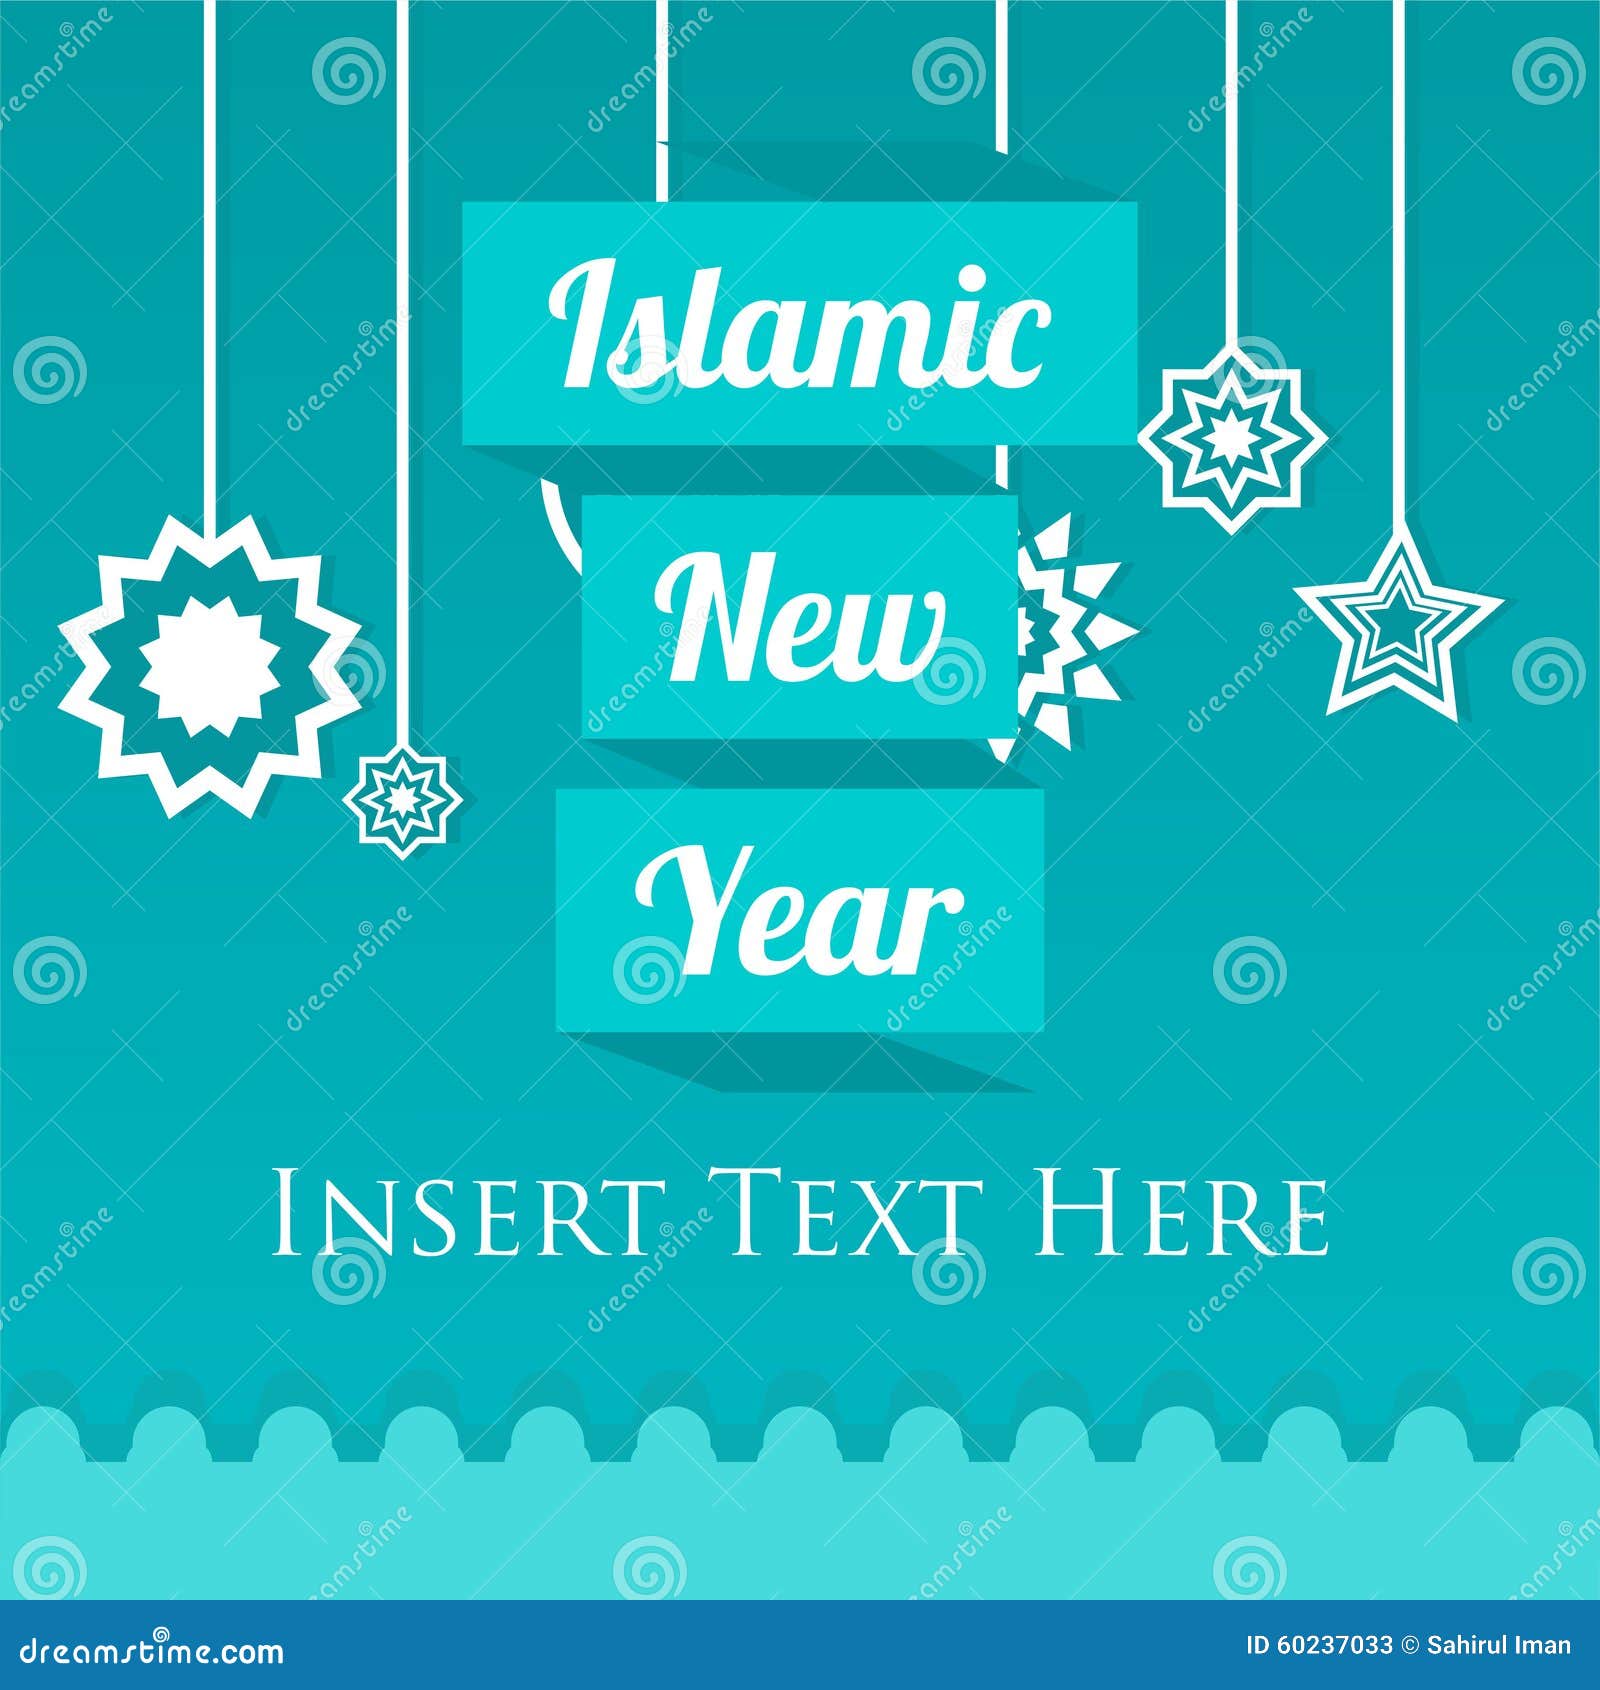 Islamic New Year Vector Template Stock Vector - Image 